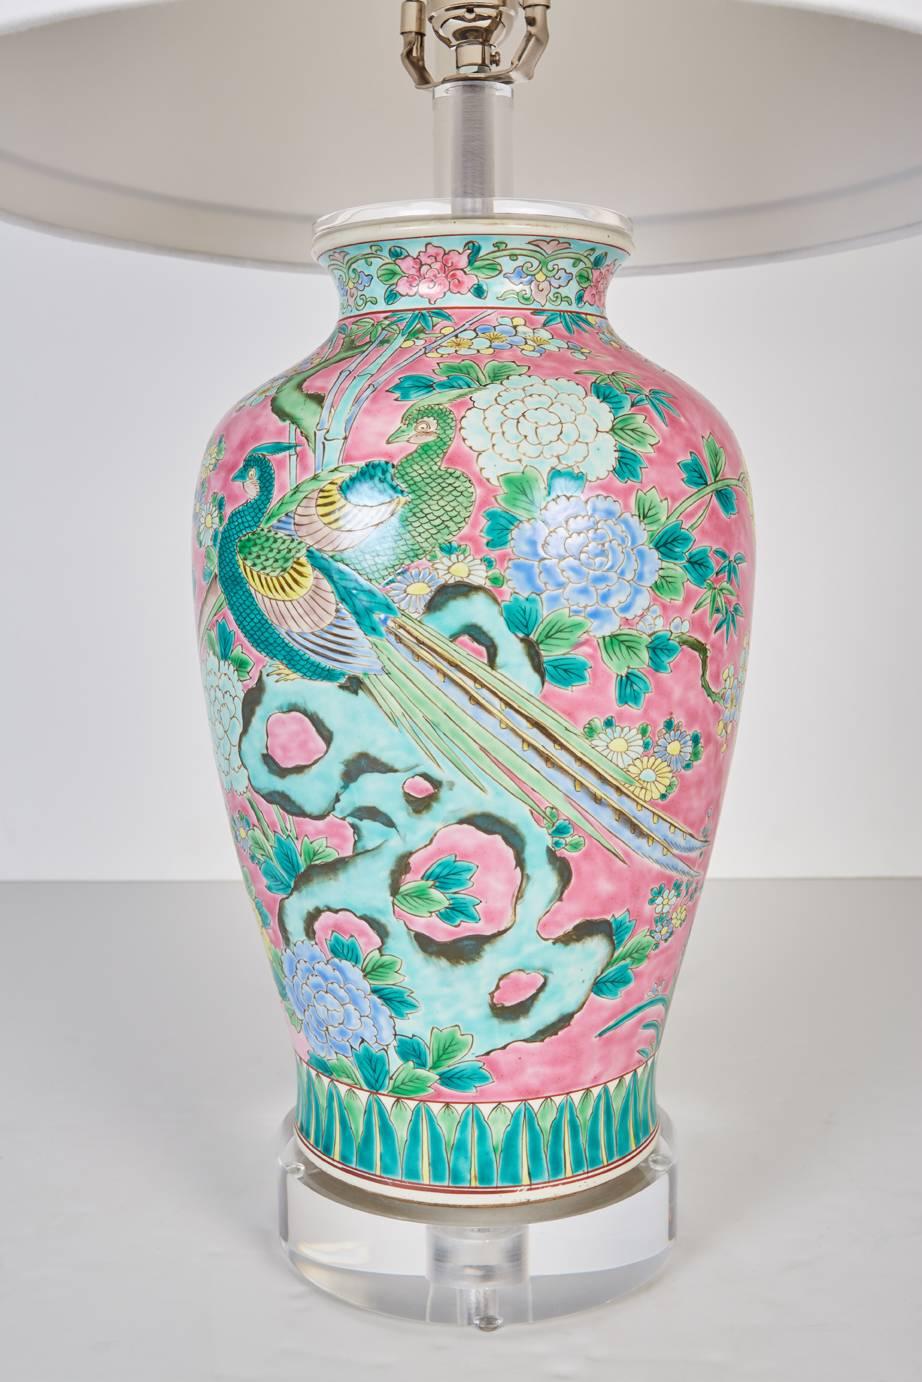 Antique Japanese vase newly custom mounted as a lamp. Painted in a Chinese style with multicolored floral and bird motifs against a vibrant pink background now custom mounted as lamp. Lamp fitted with new custom Lucite base and new custom silk shade